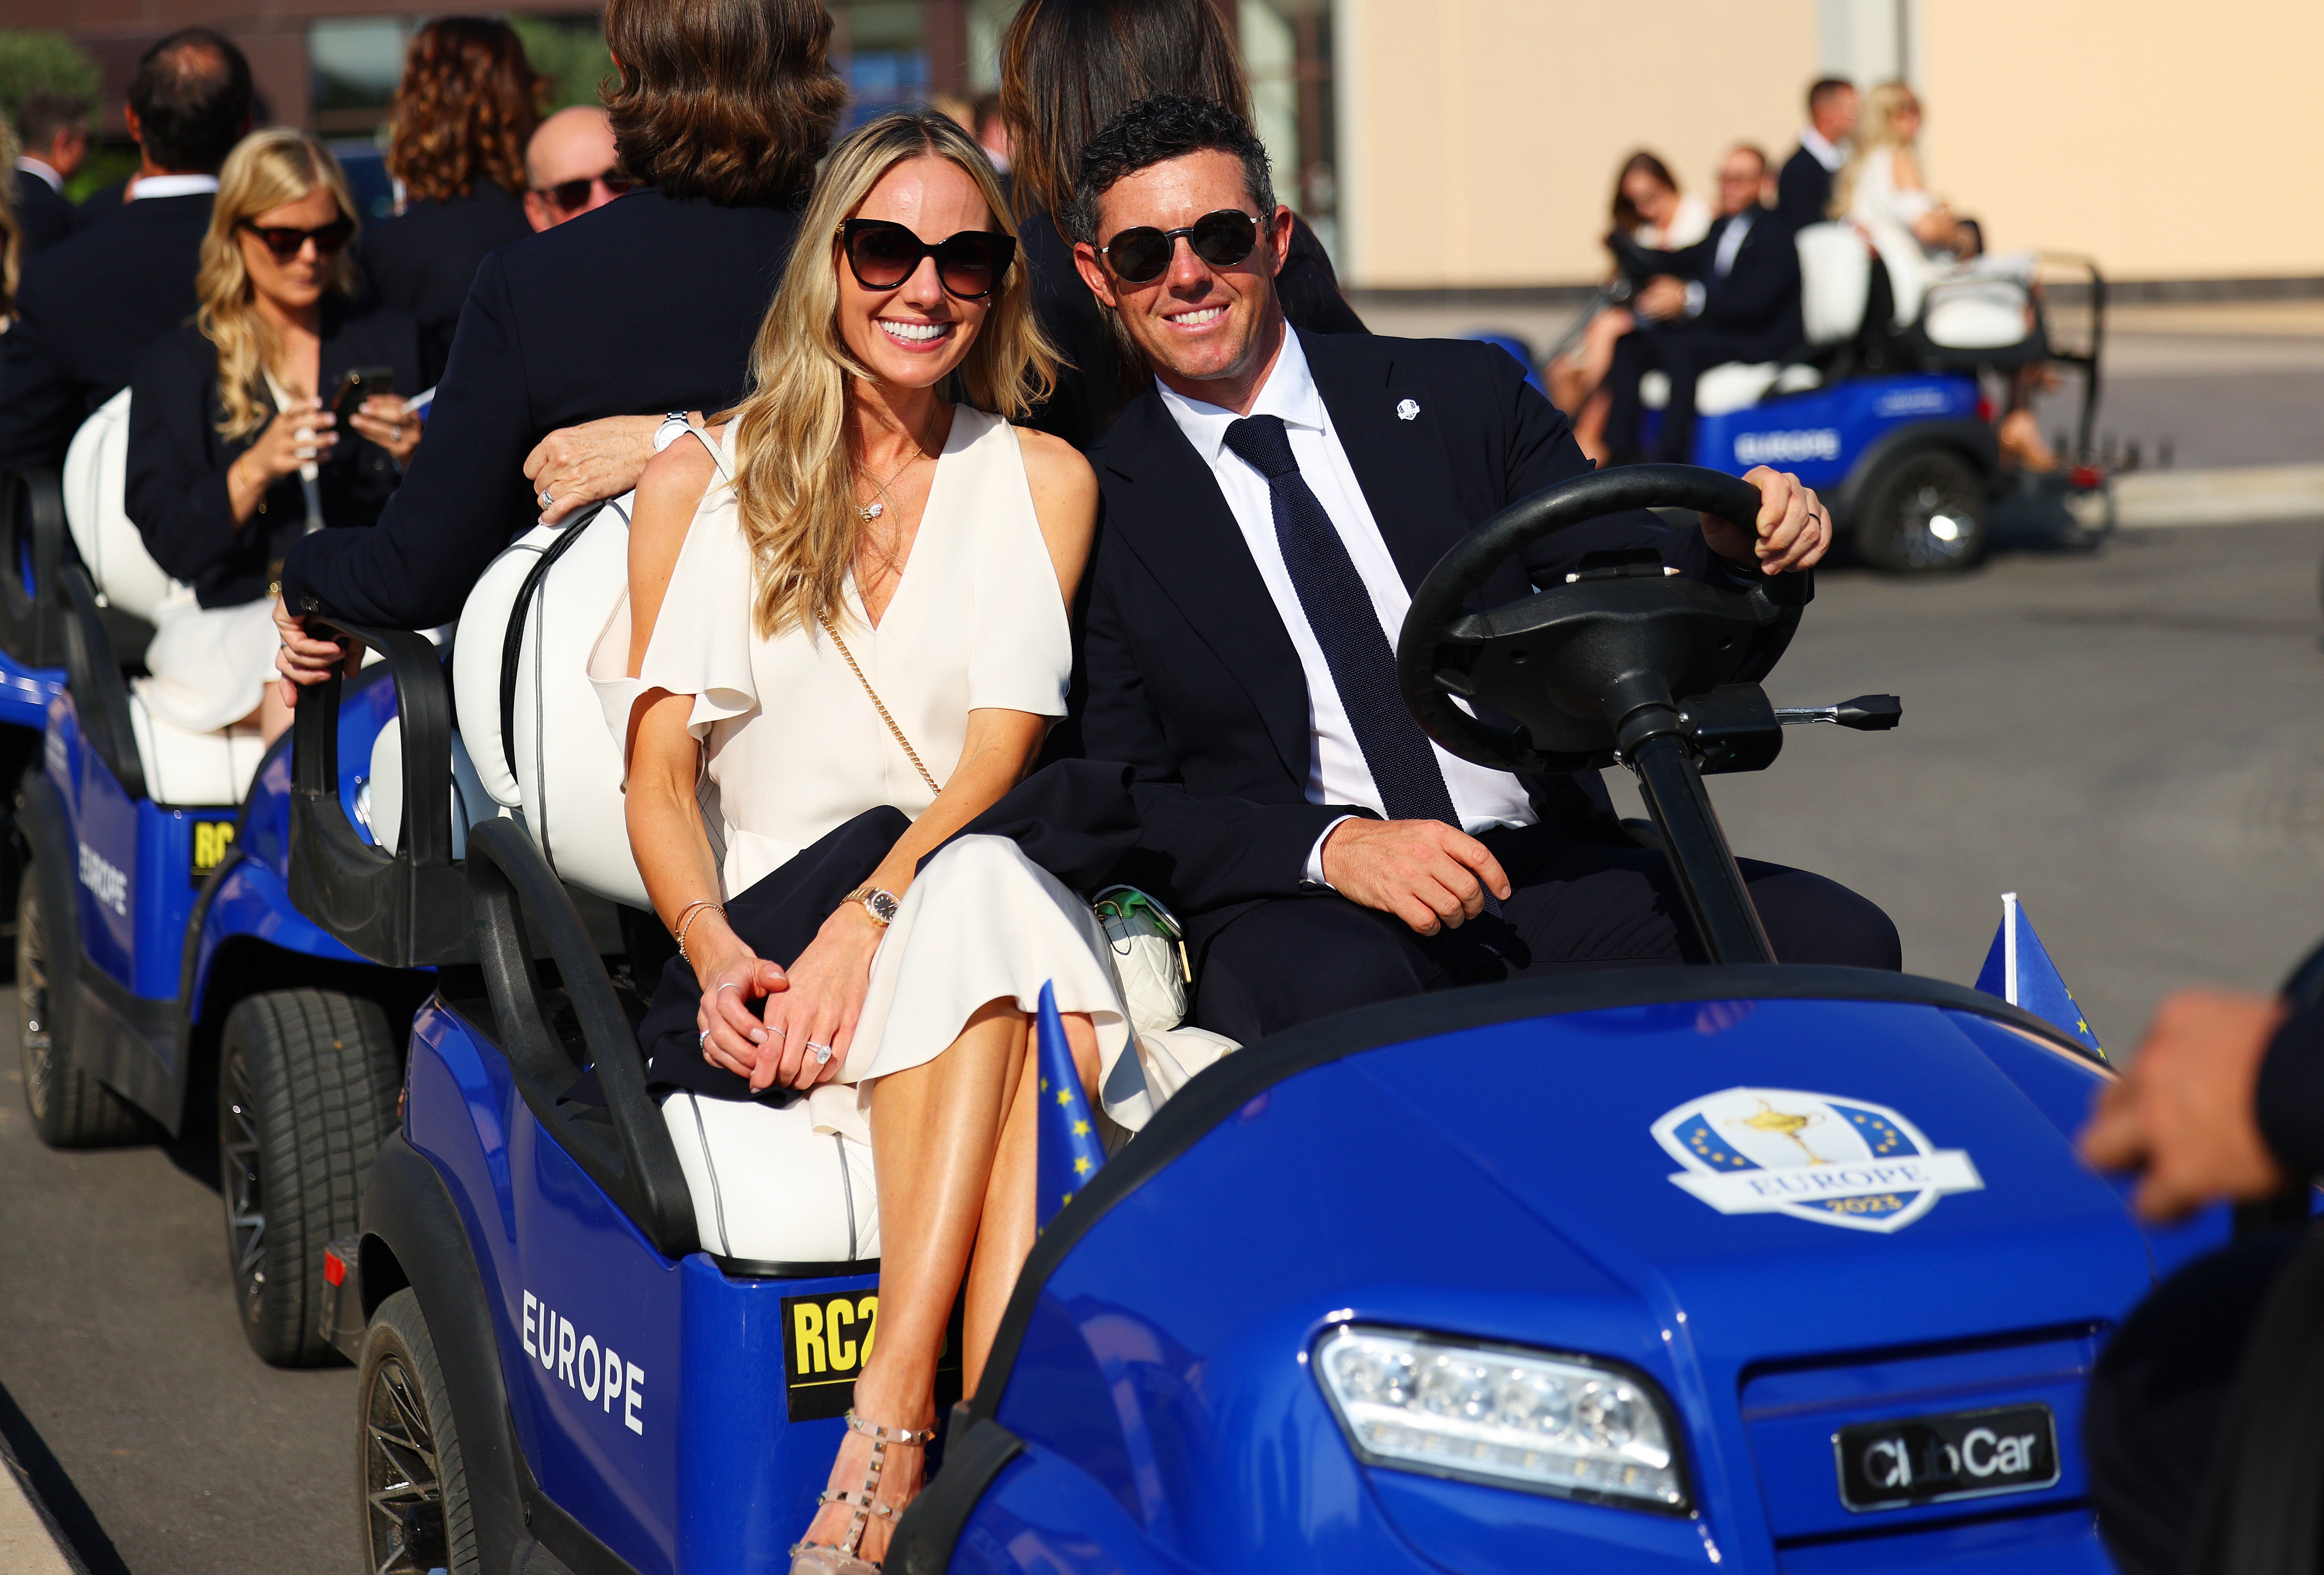 Rory McIlroy and wife Erica Stoll arrive at the opening ceremony for the 2023 Ryder Cup at Marco Simone Golf Club on September 28, 2023 in Rome, Italy